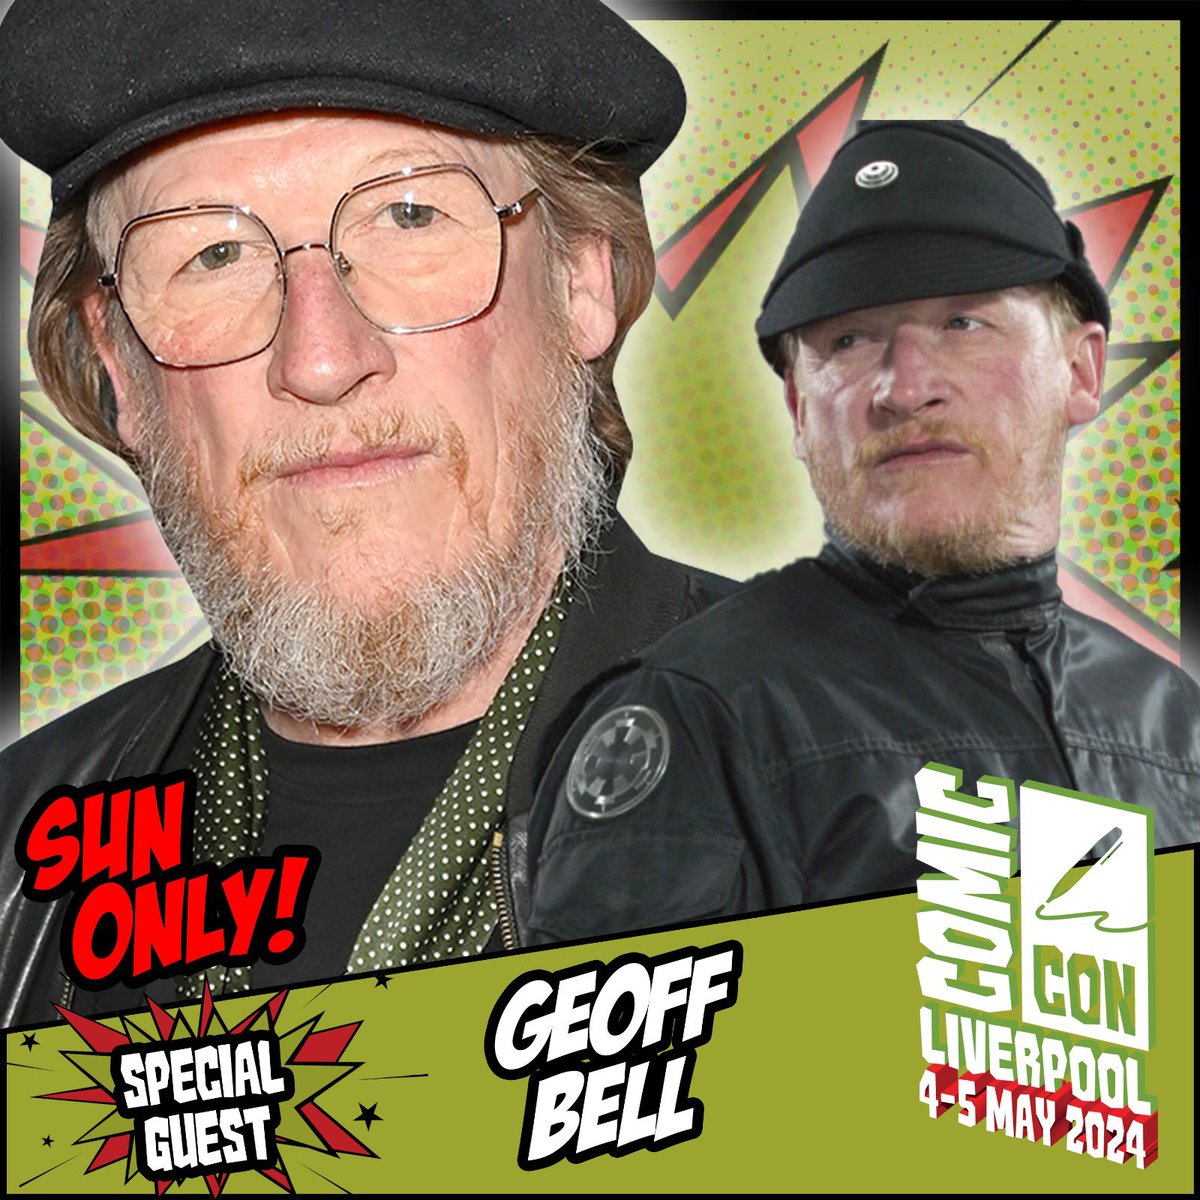 Comic Con Liverpool welcomes Geoff Bell, known for projects such as War Horse, Rogue One, and many more. Appearing Sunday only! Tickets: comicconventionliverpool.co.uk